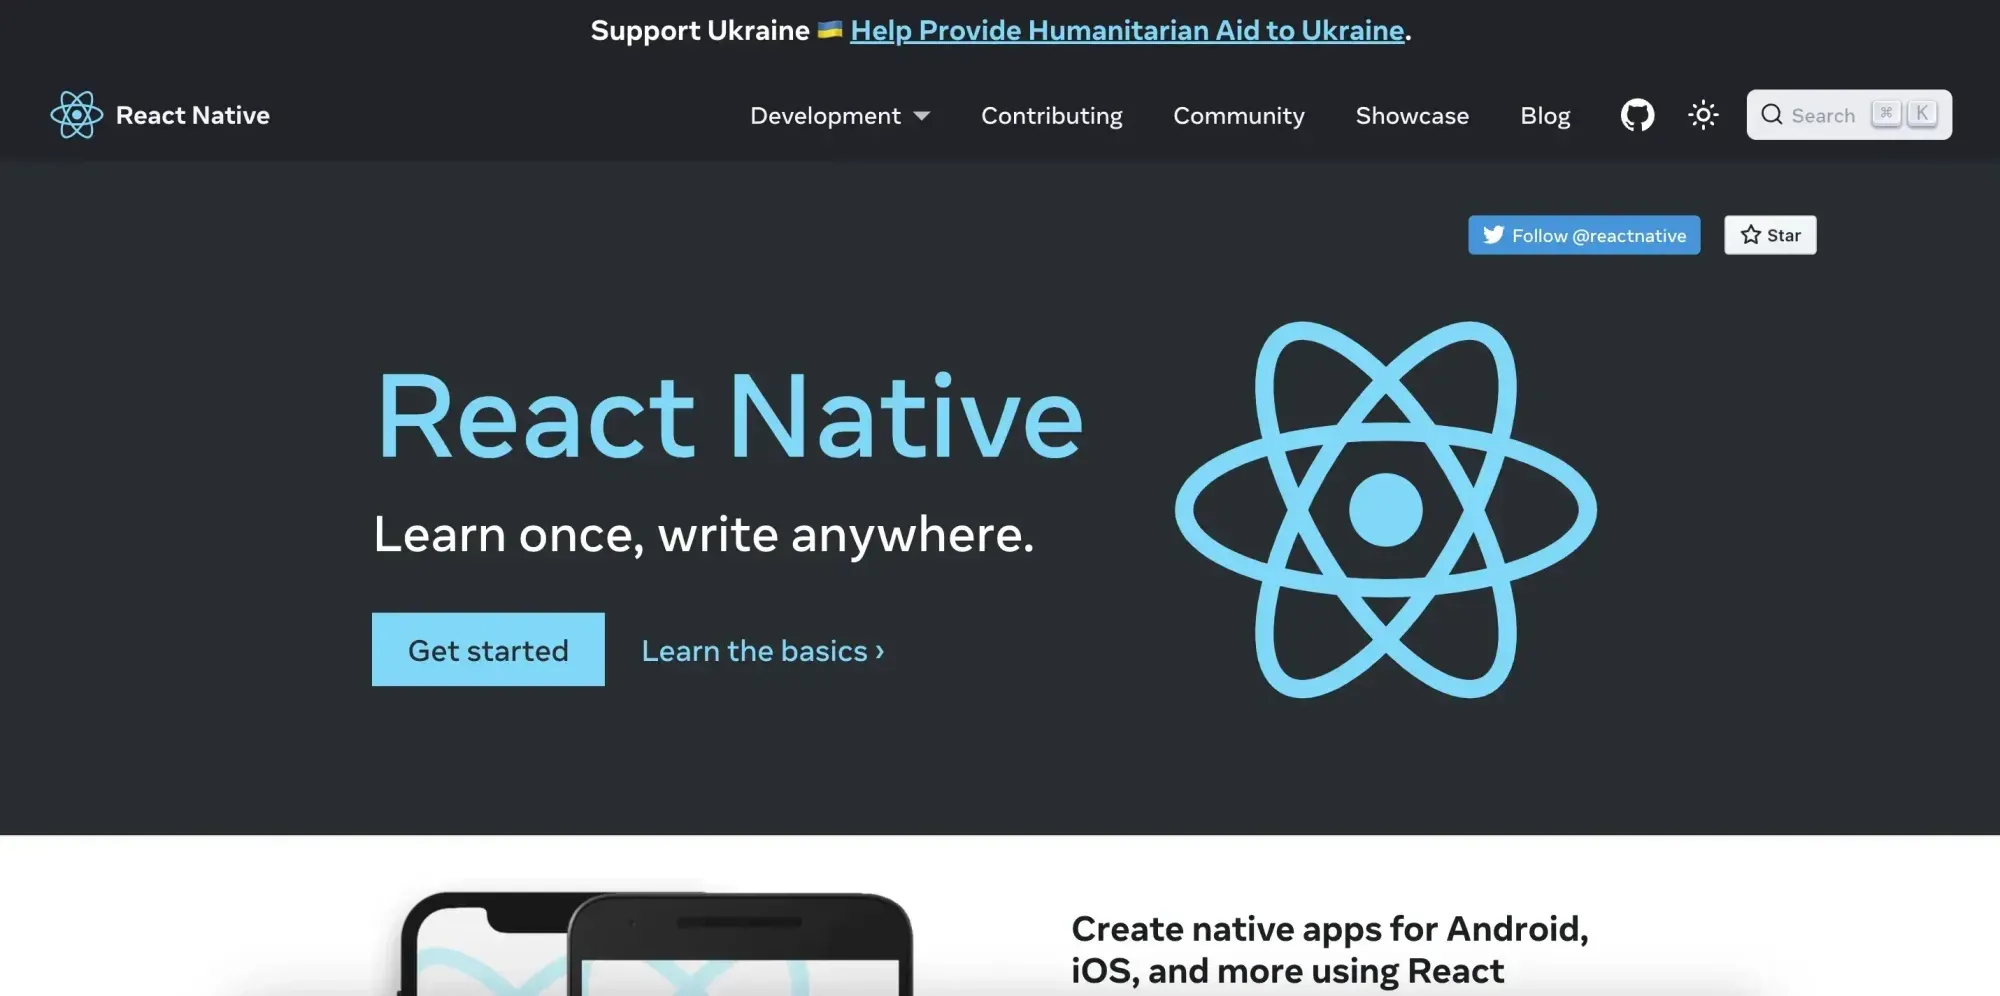 Grey and white background, light blue font showing a logo and "React Native".